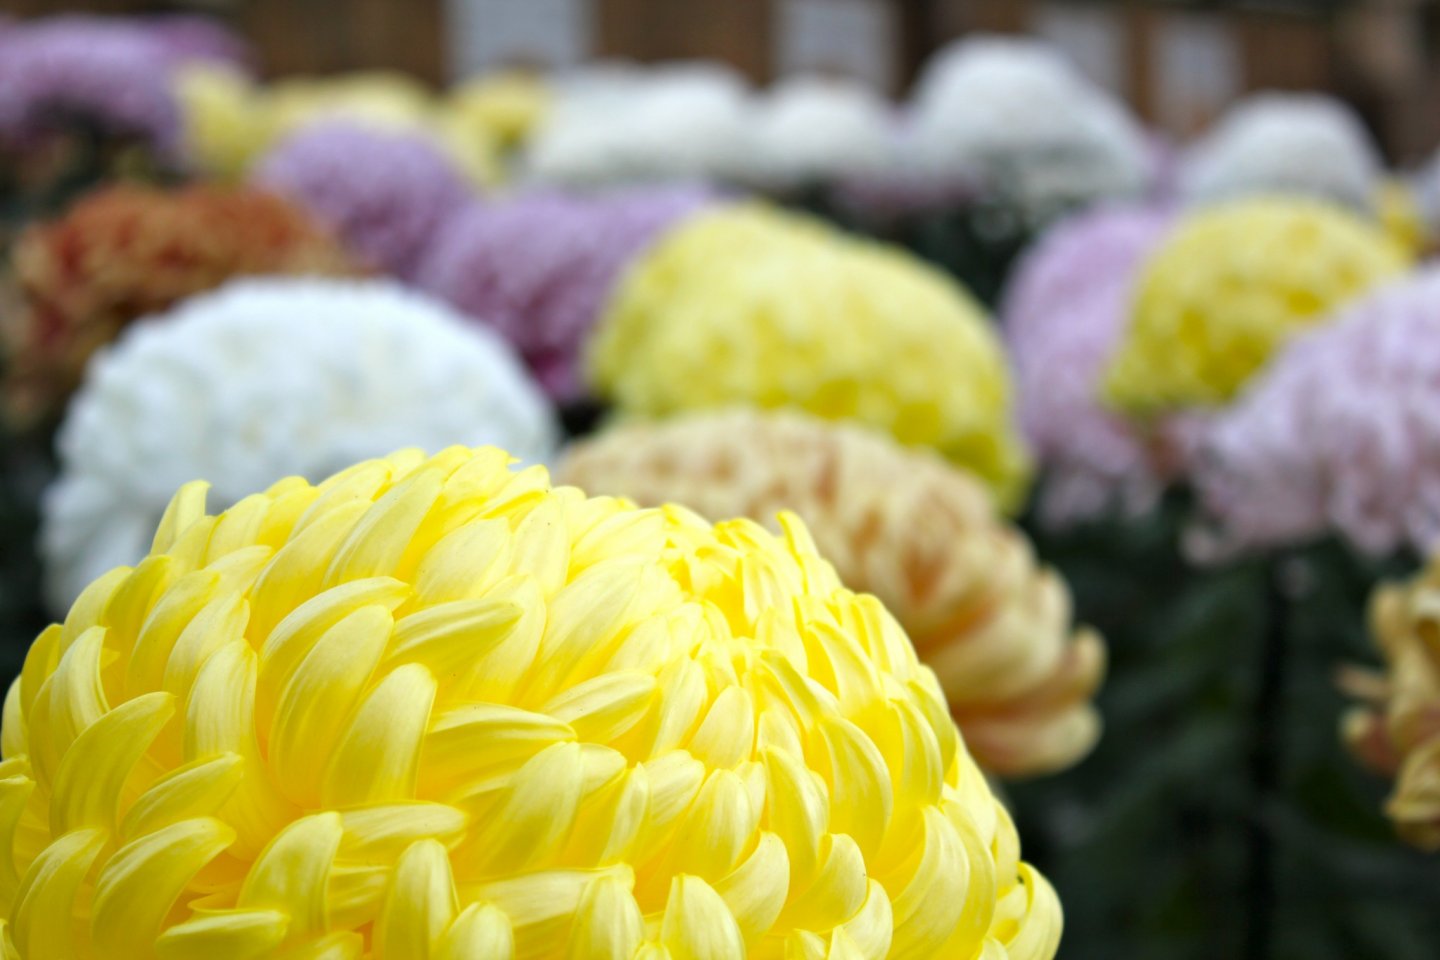 Japanese Chrysanthemums: a labor intensive process that the Japanese have been perfecting for centuries.